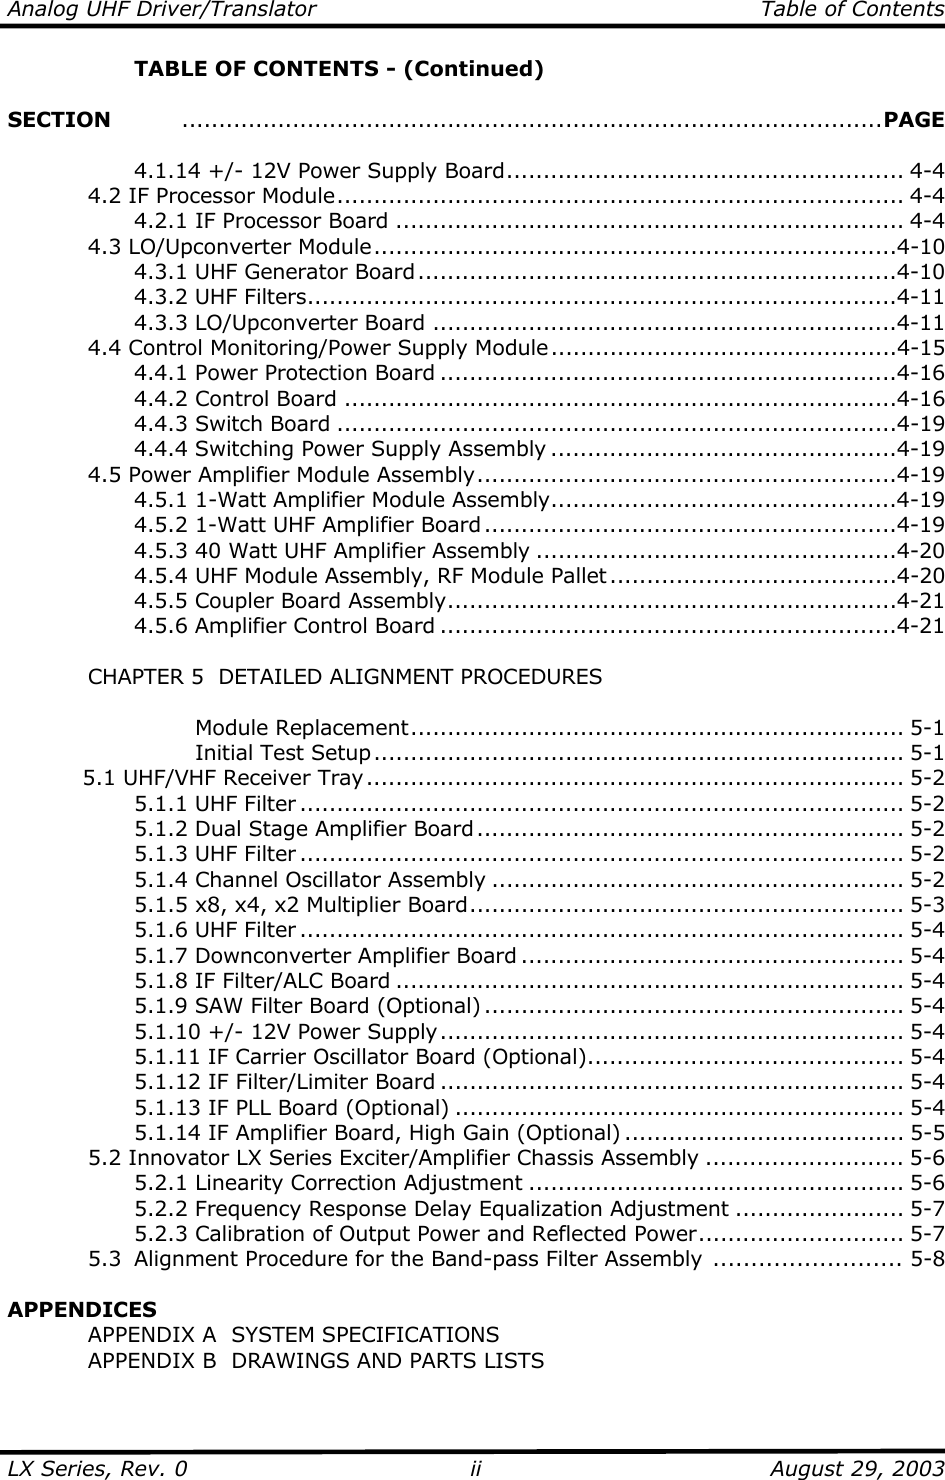 Analog UHF Driver/Translator   Table of Contents  LX Series, Rev. 0    August 29, 2003 ii  TABLE OF CONTENTS - (Continued)  SECTION   ...............................................................................................PAGE         4.1.14 +/- 12V Power Supply Board...................................................... 4-4   4.2 IF Processor Module............................................................................. 4-4     4.2.1 IF Processor Board ..................................................................... 4-4  4.3 LO/Upconverter Module.......................................................................4-10     4.3.1 UHF Generator Board.................................................................4-10   4.3.2 UHF Filters................................................................................4-11   4.3.3 LO/Upconverter Board ...............................................................4-11   4.4 Control Monitoring/Power Supply Module...............................................4-15     4.4.1 Power Protection Board ..............................................................4-16     4.4.2 Control Board ...........................................................................4-16   4.4.3 Switch Board ............................................................................4-19     4.4.4 Switching Power Supply Assembly ...............................................4-19   4.5 Power Amplifier Module Assembly.........................................................4-19     4.5.1 1-Watt Amplifier Module Assembly...............................................4-19     4.5.2 1-Watt UHF Amplifier Board ........................................................4-19     4.5.3 40 Watt UHF Amplifier Assembly .................................................4-20     4.5.4 UHF Module Assembly, RF Module Pallet .......................................4-20   4.5.5 Coupler Board Assembly.............................................................4-21   4.5.6 Amplifier Control Board ..............................................................4-21    CHAPTER 5  DETAILED ALIGNMENT PROCEDURES      Module Replacement................................................................... 5-1     Initial Test Setup........................................................................ 5-1 5.1 UHF/VHF Receiver Tray......................................................................... 5-2   5.1.1 UHF Filter .................................................................................. 5-2   5.1.2 Dual Stage Amplifier Board .......................................................... 5-2   5.1.3 UHF Filter .................................................................................. 5-2     5.1.4 Channel Oscillator Assembly ........................................................ 5-2     5.1.5 x8, x4, x2 Multiplier Board........................................................... 5-3   5.1.6 UHF Filter .................................................................................. 5-4   5.1.7 Downconverter Amplifier Board .................................................... 5-4     5.1.8 IF Filter/ALC Board ..................................................................... 5-4   5.1.9 SAW Filter Board (Optional) ......................................................... 5-4   5.1.10 +/- 12V Power Supply............................................................... 5-4     5.1.11 IF Carrier Oscillator Board (Optional)........................................... 5-4     5.1.12 IF Filter/Limiter Board ............................................................... 5-4     5.1.13 IF PLL Board (Optional) ............................................................. 5-4     5.1.14 IF Amplifier Board, High Gain (Optional) ...................................... 5-5   5.2 Innovator LX Series Exciter/Amplifier Chassis Assembly ........................... 5-6     5.2.1 Linearity Correction Adjustment ................................................... 5-6     5.2.2 Frequency Response Delay Equalization Adjustment ....................... 5-7     5.2.3 Calibration of Output Power and Reflected Power............................ 5-7   5.3  Alignment Procedure for the Band-pass Filter Assembly  ......................... 5-8  APPENDICES   APPENDIX A  SYSTEM SPECIFICATIONS   APPENDIX B  DRAWINGS AND PARTS LISTS 